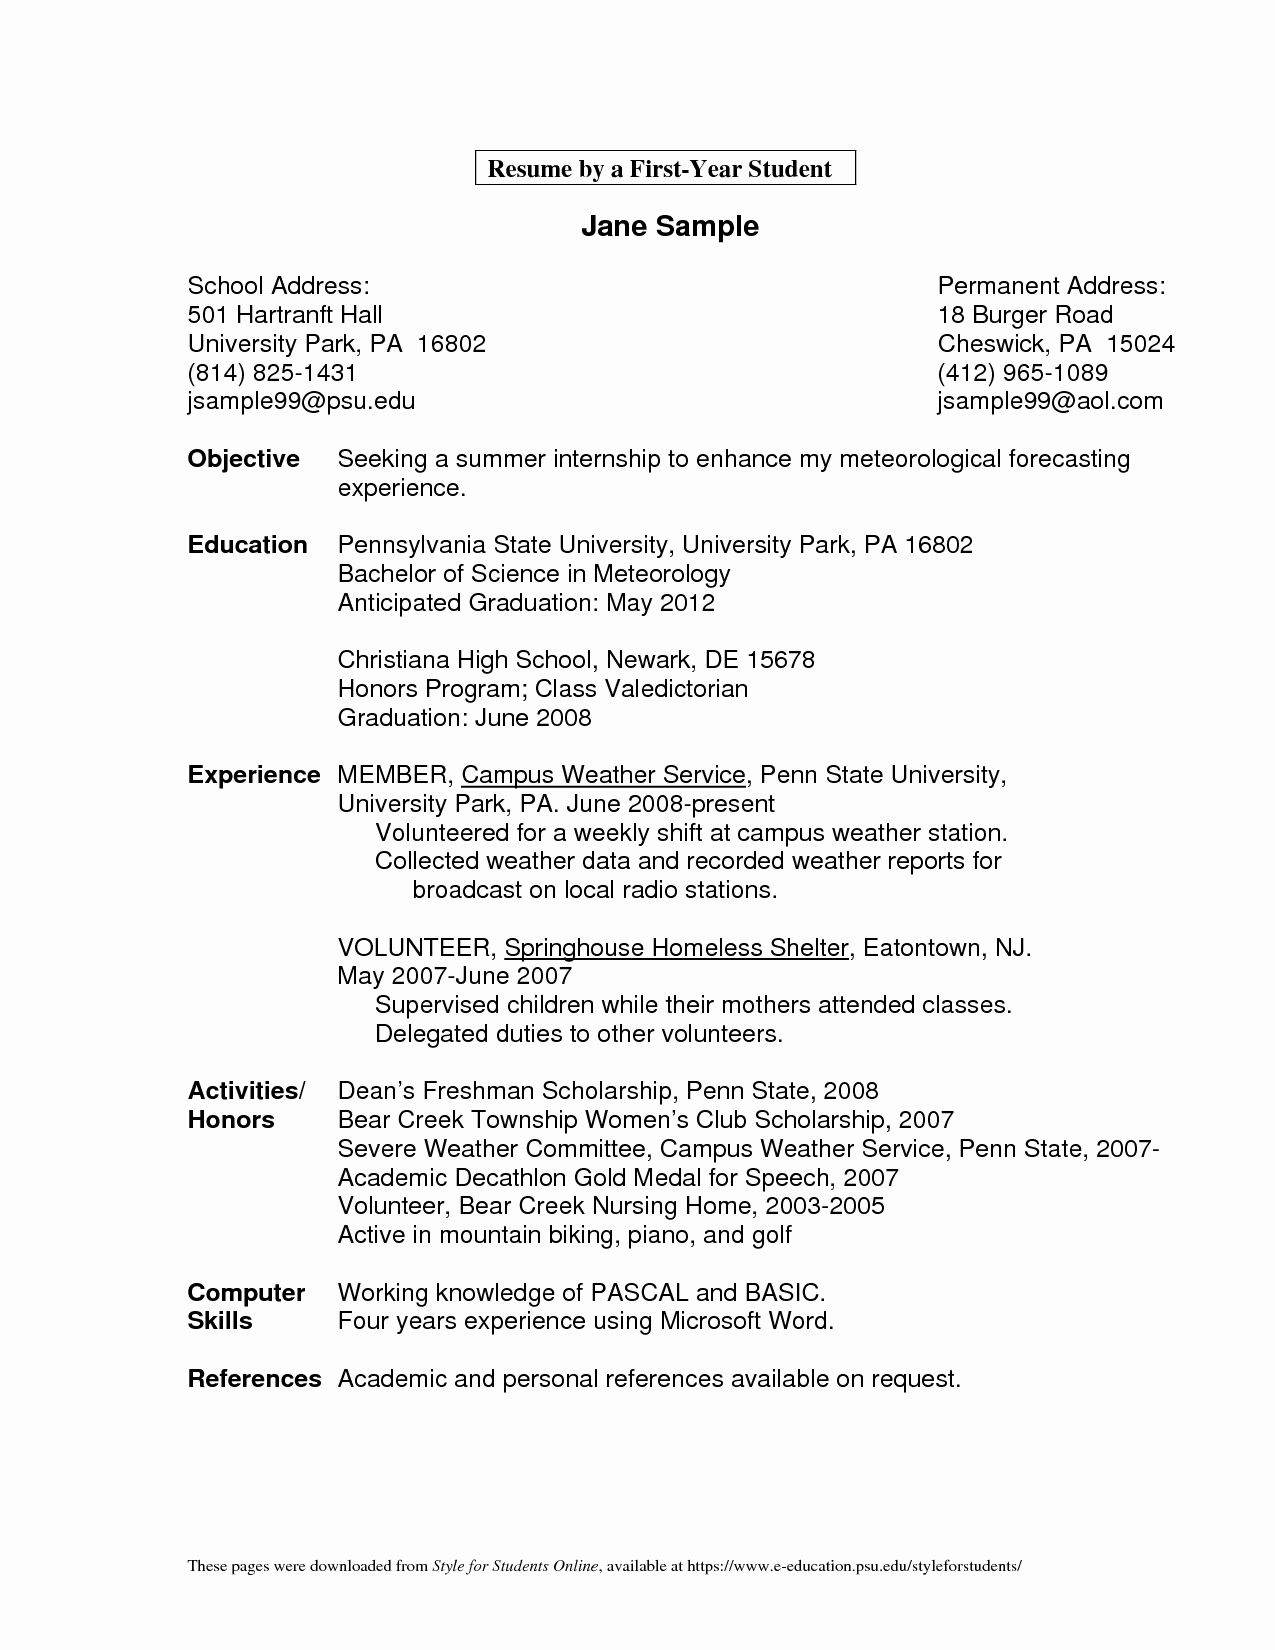 Small Business Owner Resume Template Bongdaao